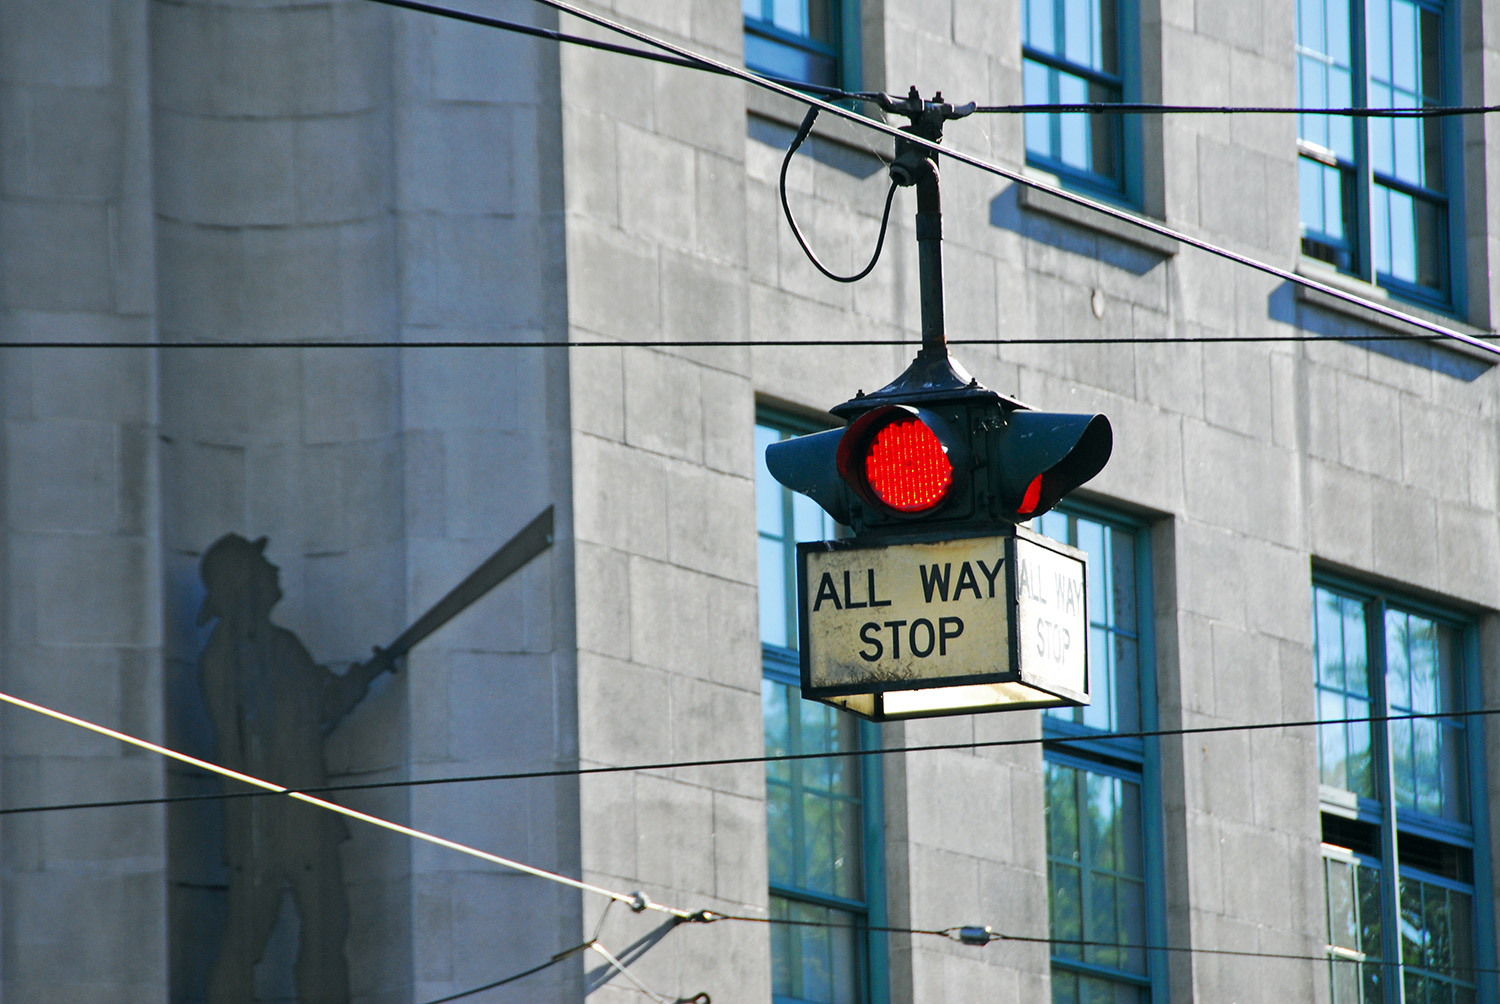 All-Way_Stop_Sign_Red_Light_Intersection_Retro_Trolley_Streetcar_Lines_Seattle_Washington.jpg